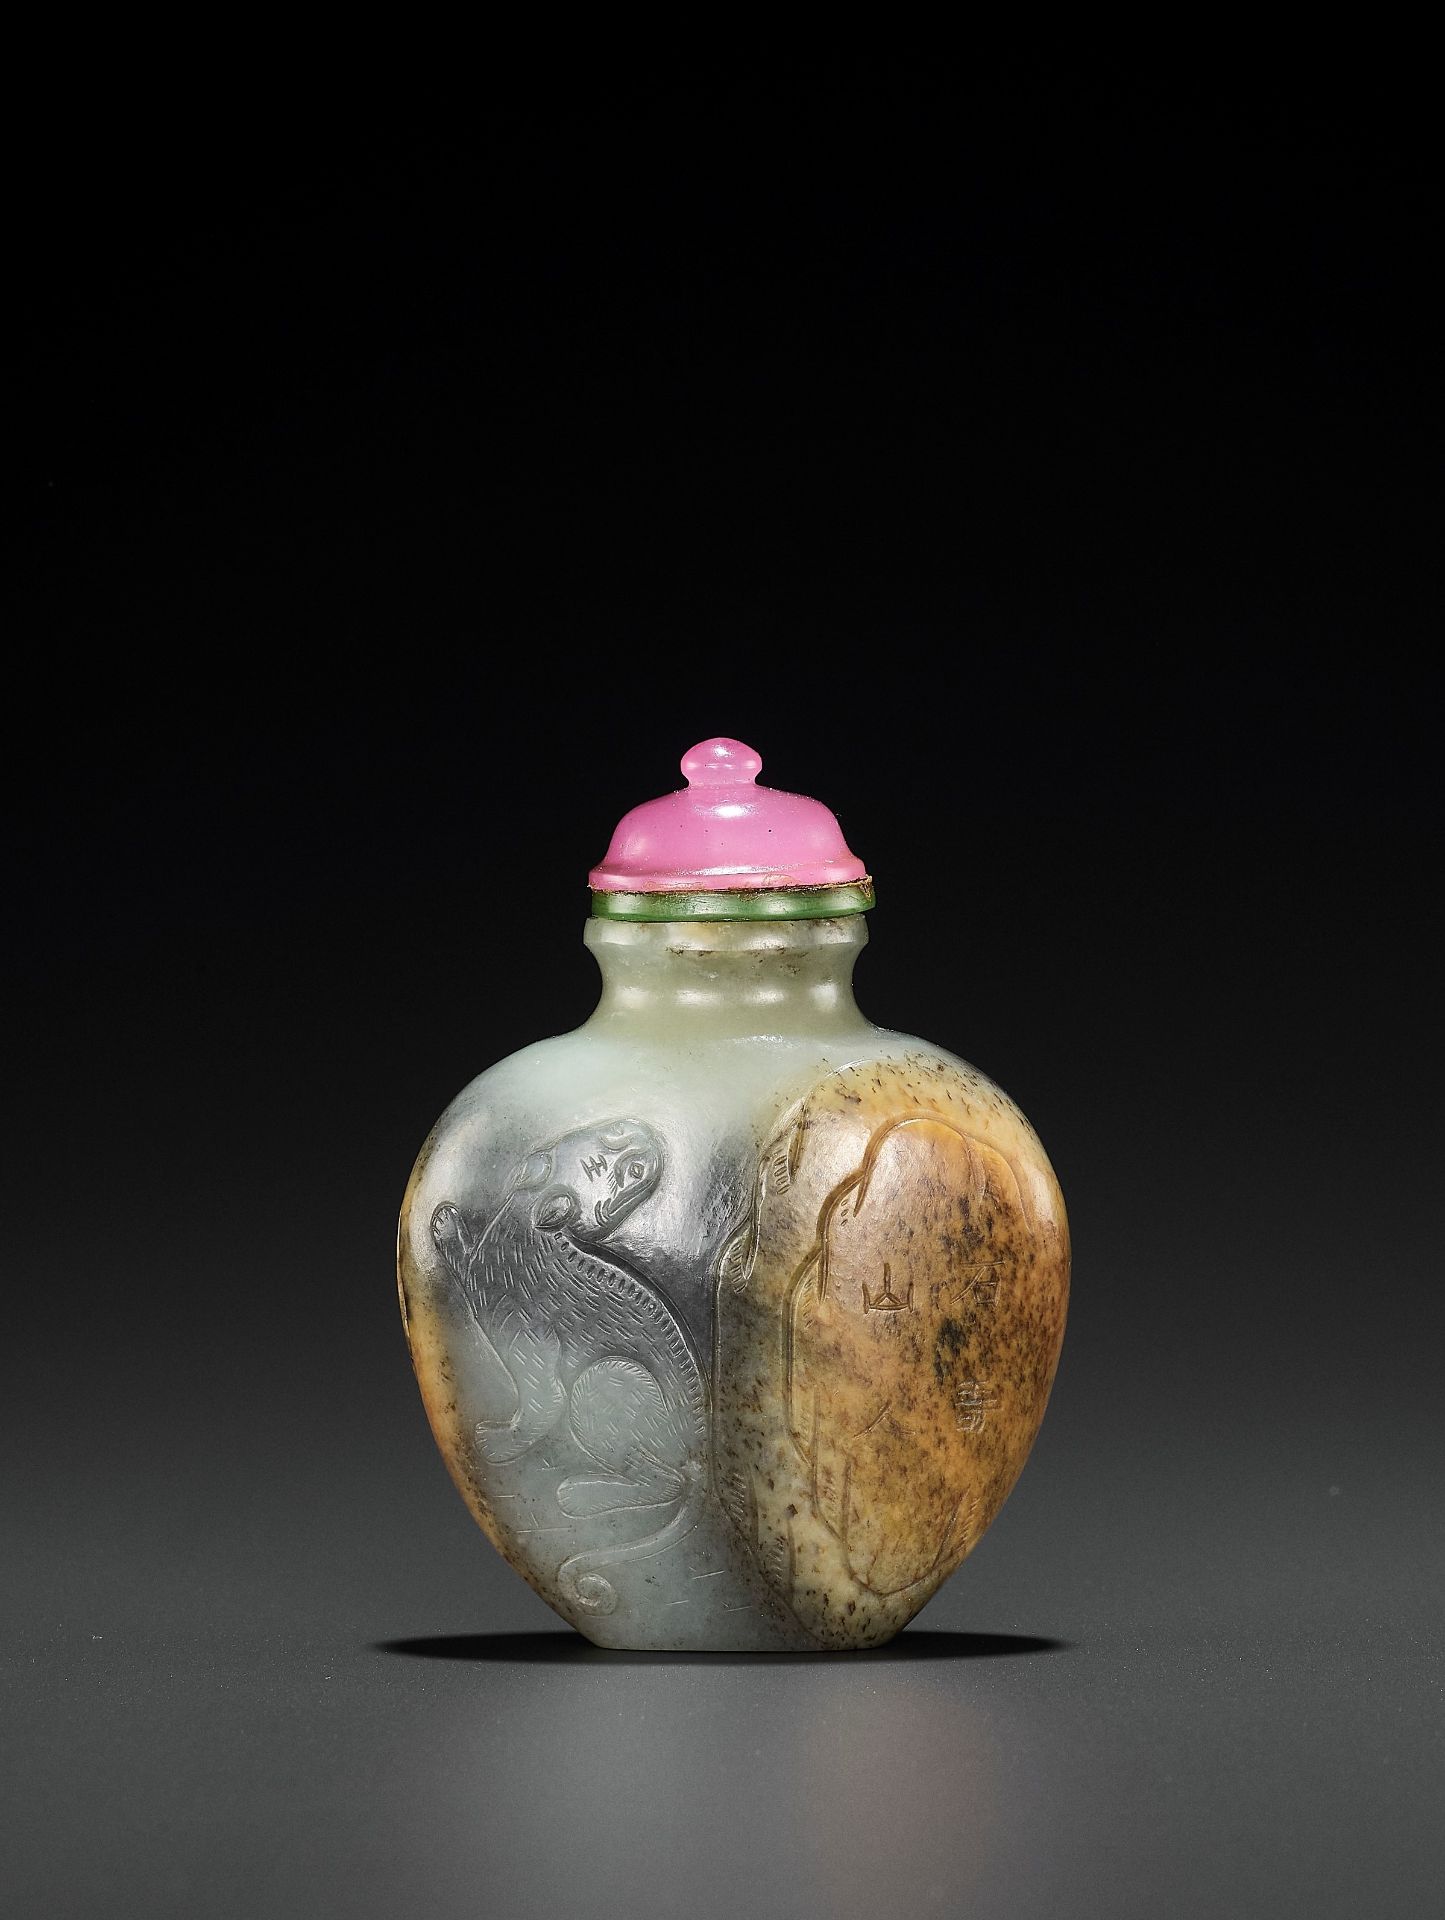 AN INSCRIBED WHITE, GRAY AND RUSSET JADEITE 'TIGER' SNUFF BOTTLE, SIGNATURE OF WANG HENG (1817-1882)